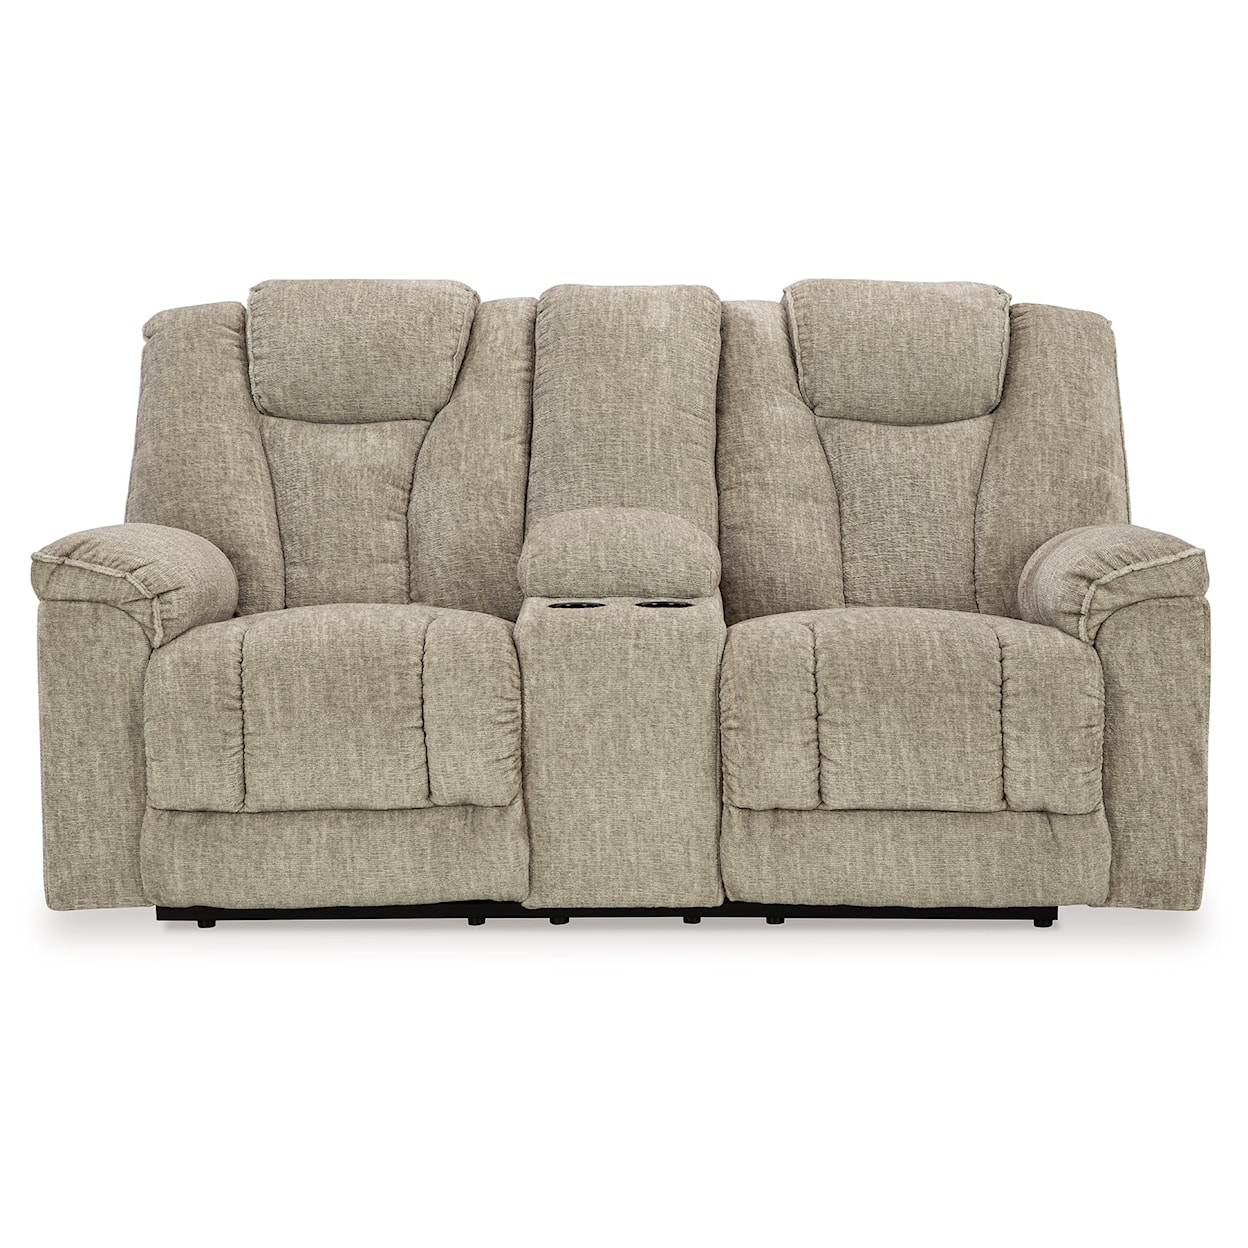 Signature Design by Ashley Furniture Hindmarsh Power Reclining Loveseat With Console